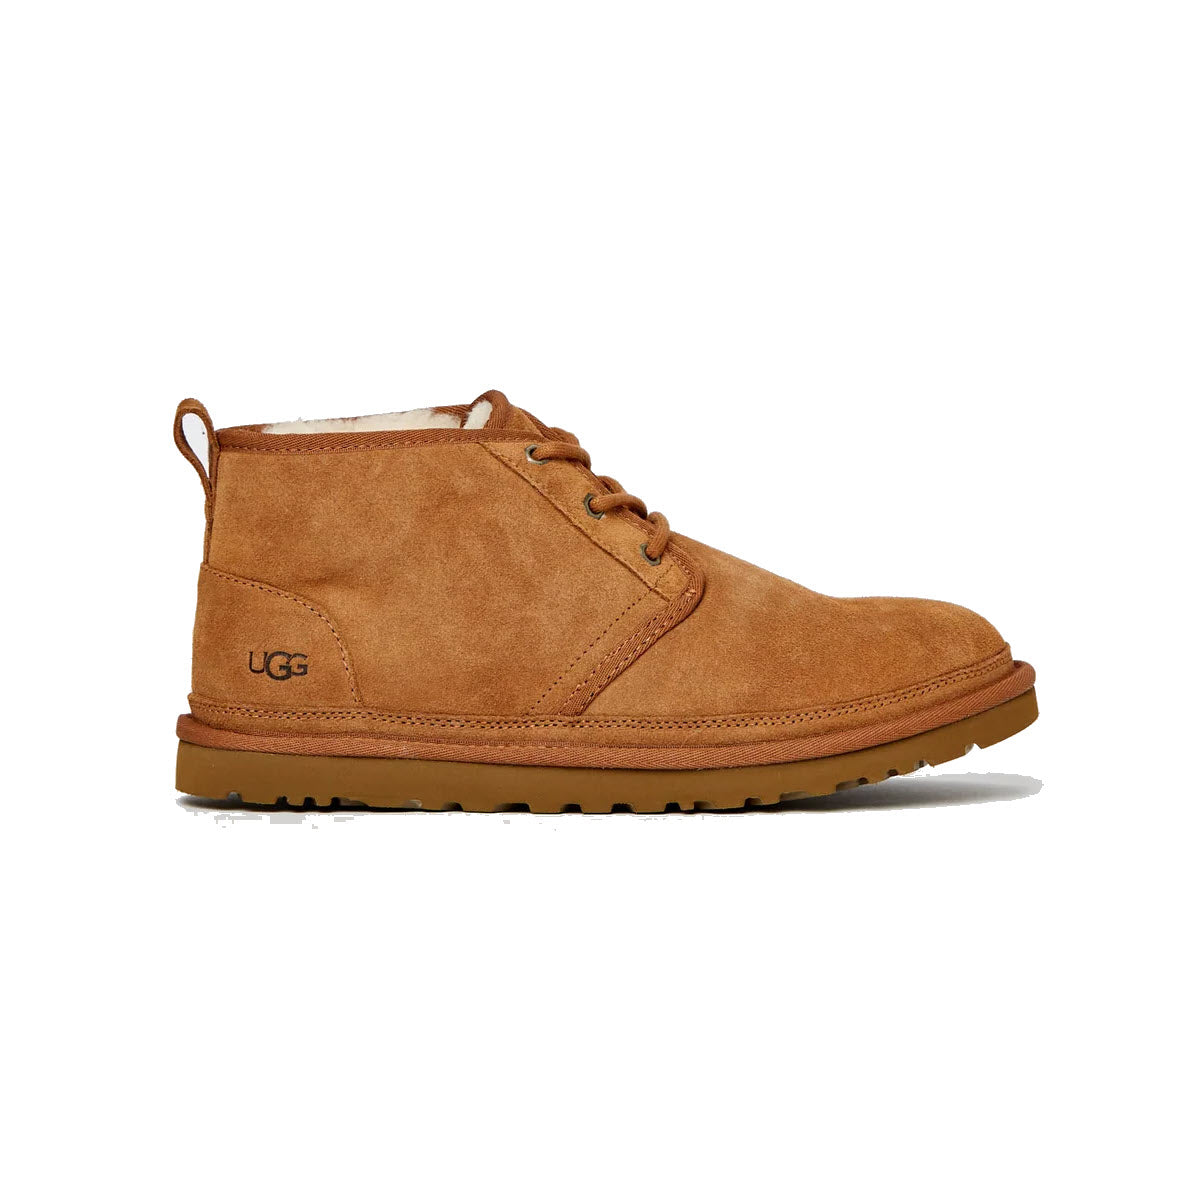 A single chestnut UGG Neumel brand boot with lace-up front and a rubber sole, isolated on a white background.